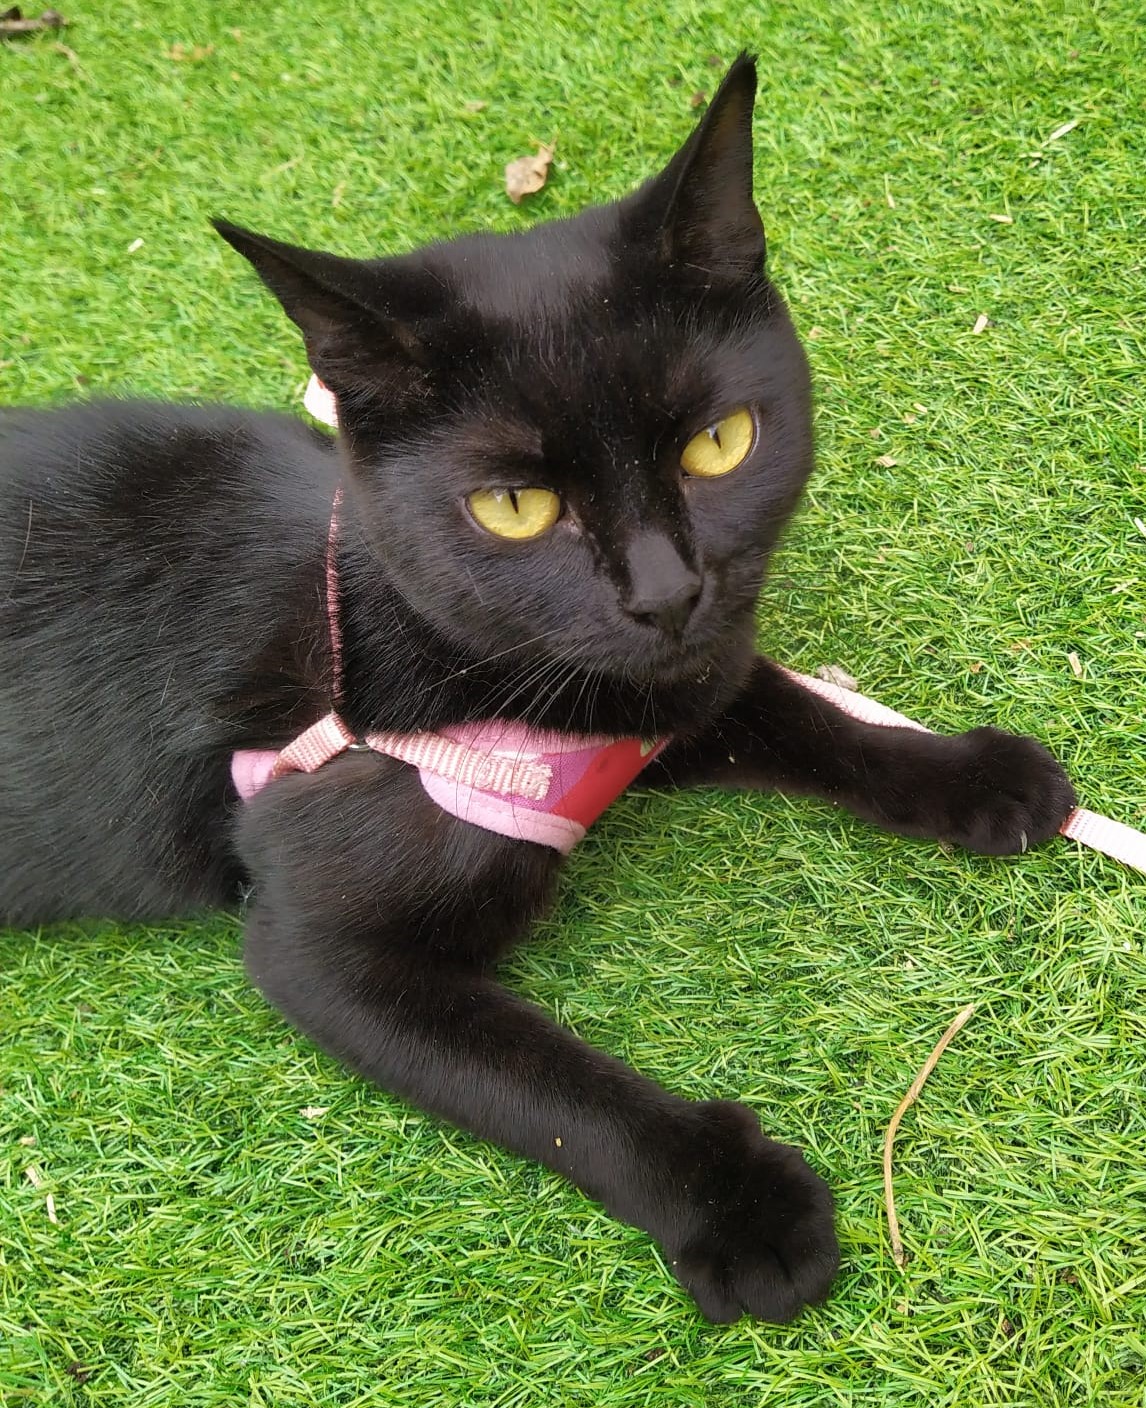 Missing Cat Reunited with homeless owner – now both are seeking their forever home